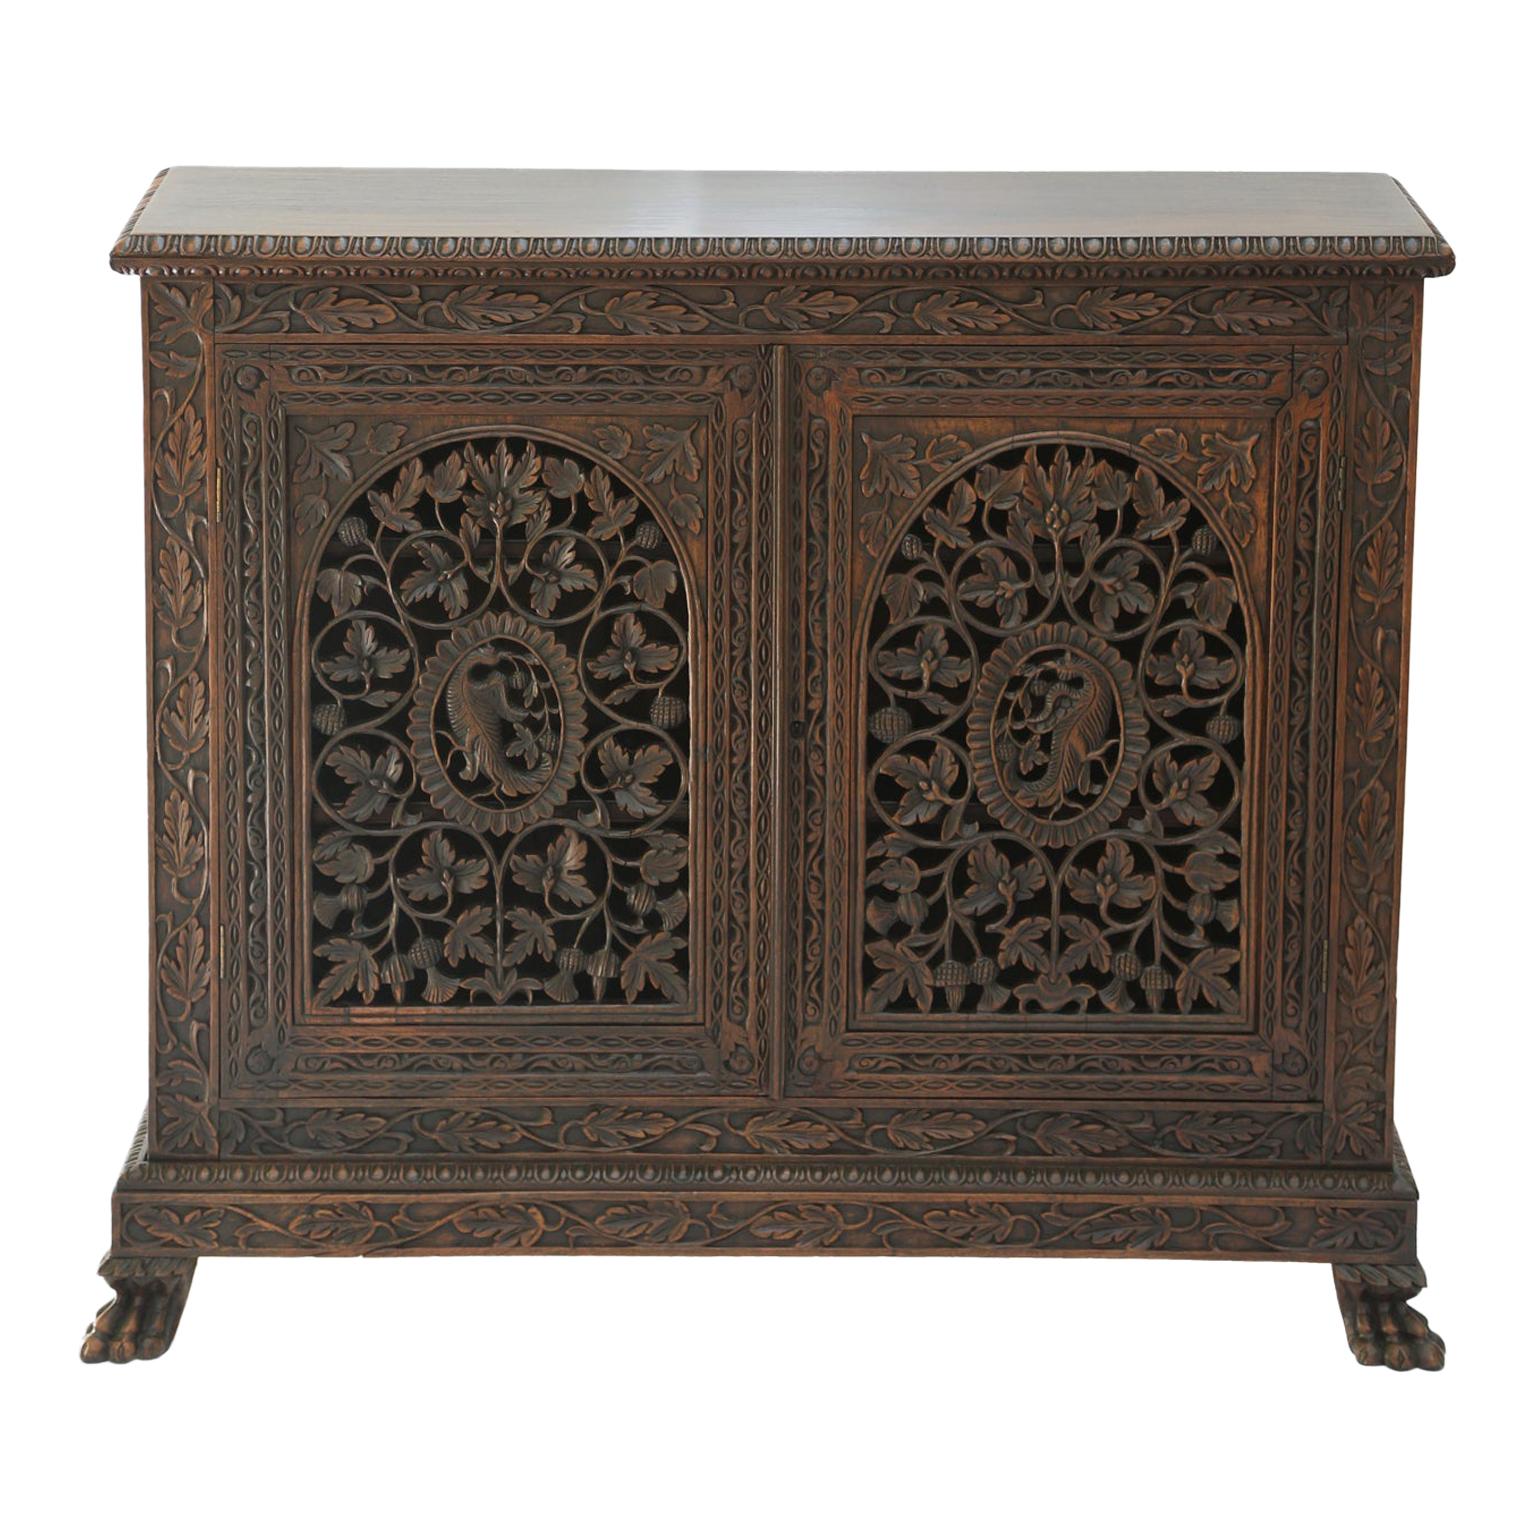 William IV Period Anglo-Indian Rosewood Cabinet